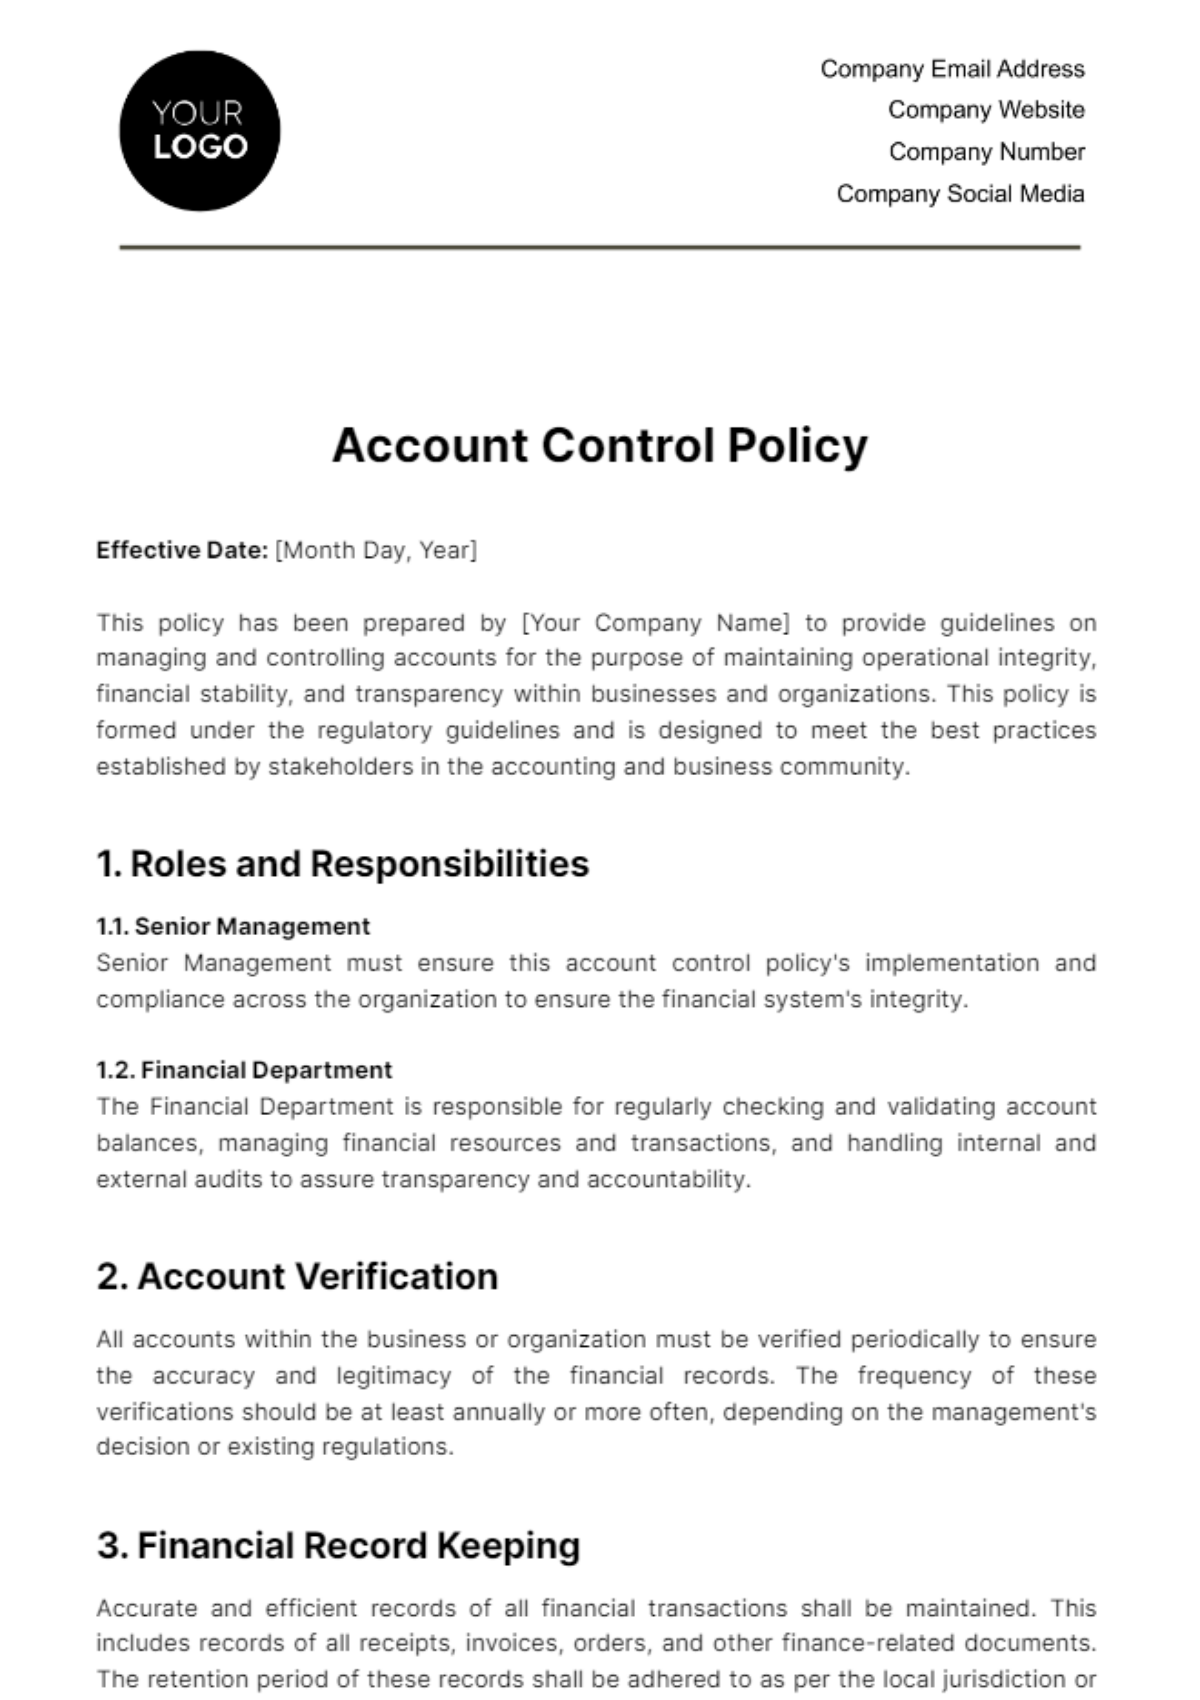 Account Control Policy Template